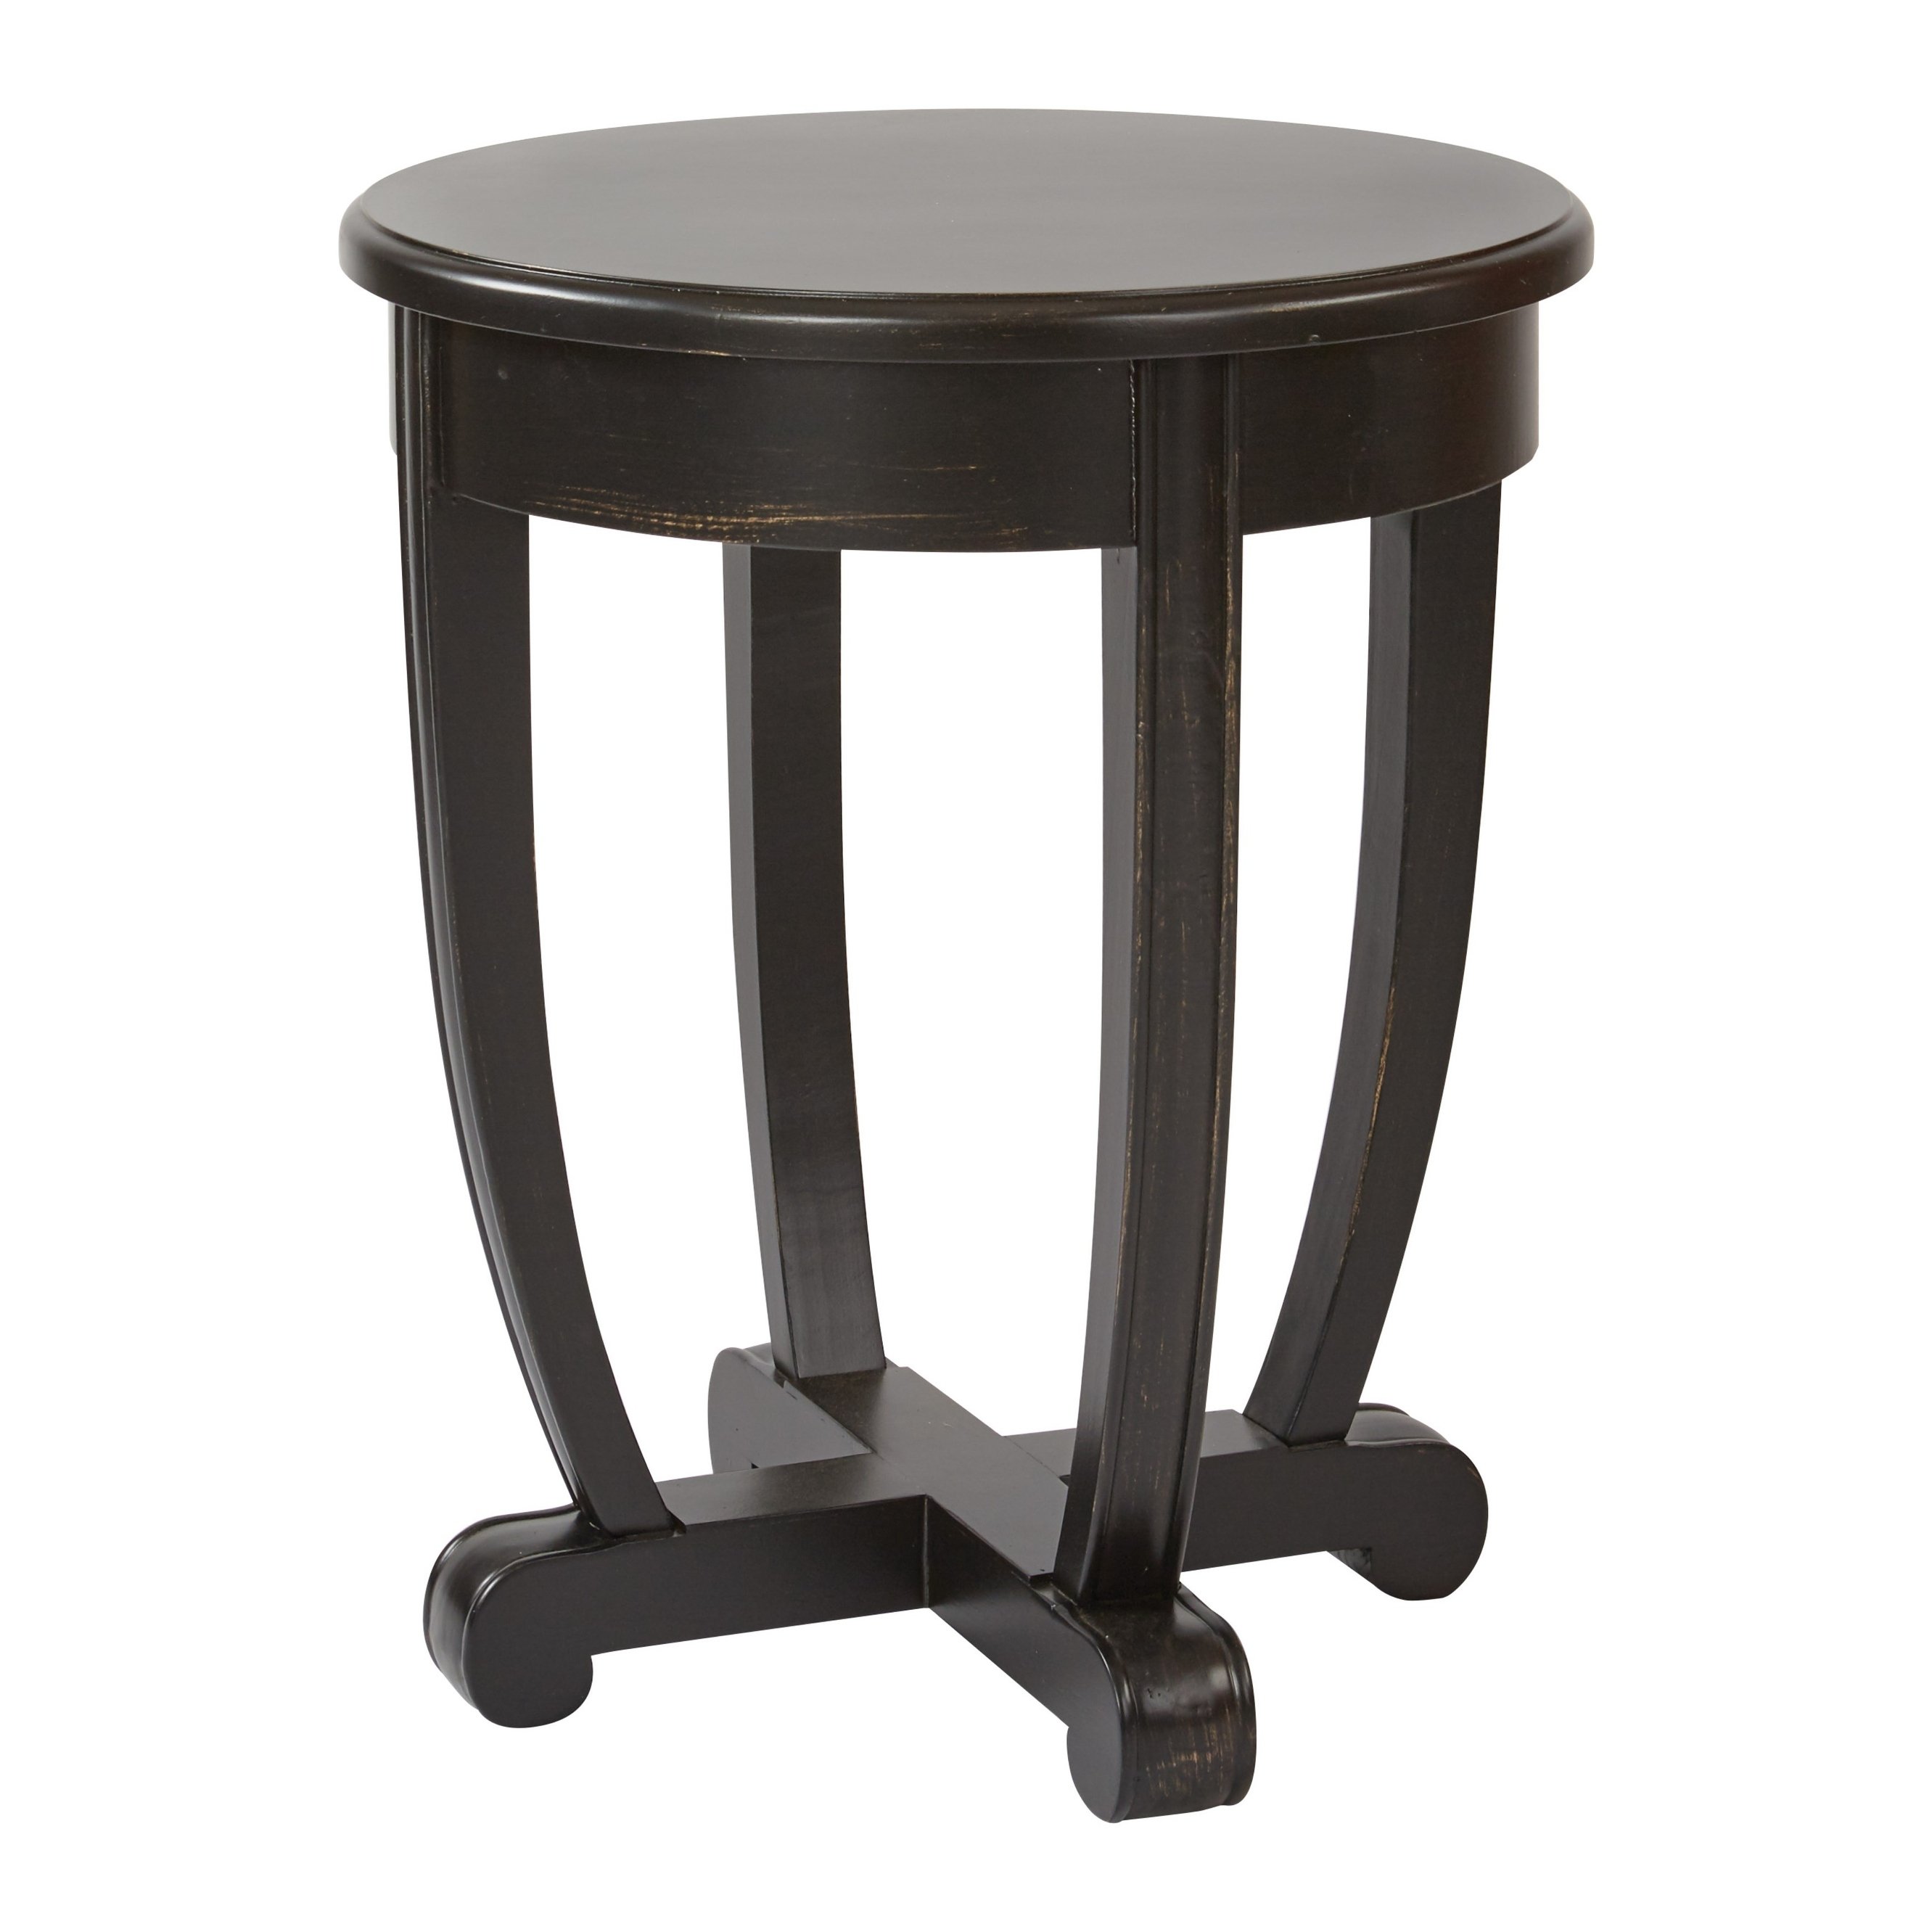 osp home furnishings tifton round accent table free shipping black today coffee with metal legs lamps under teton wood nightstand drawers modern tablecloth beach house decor teal